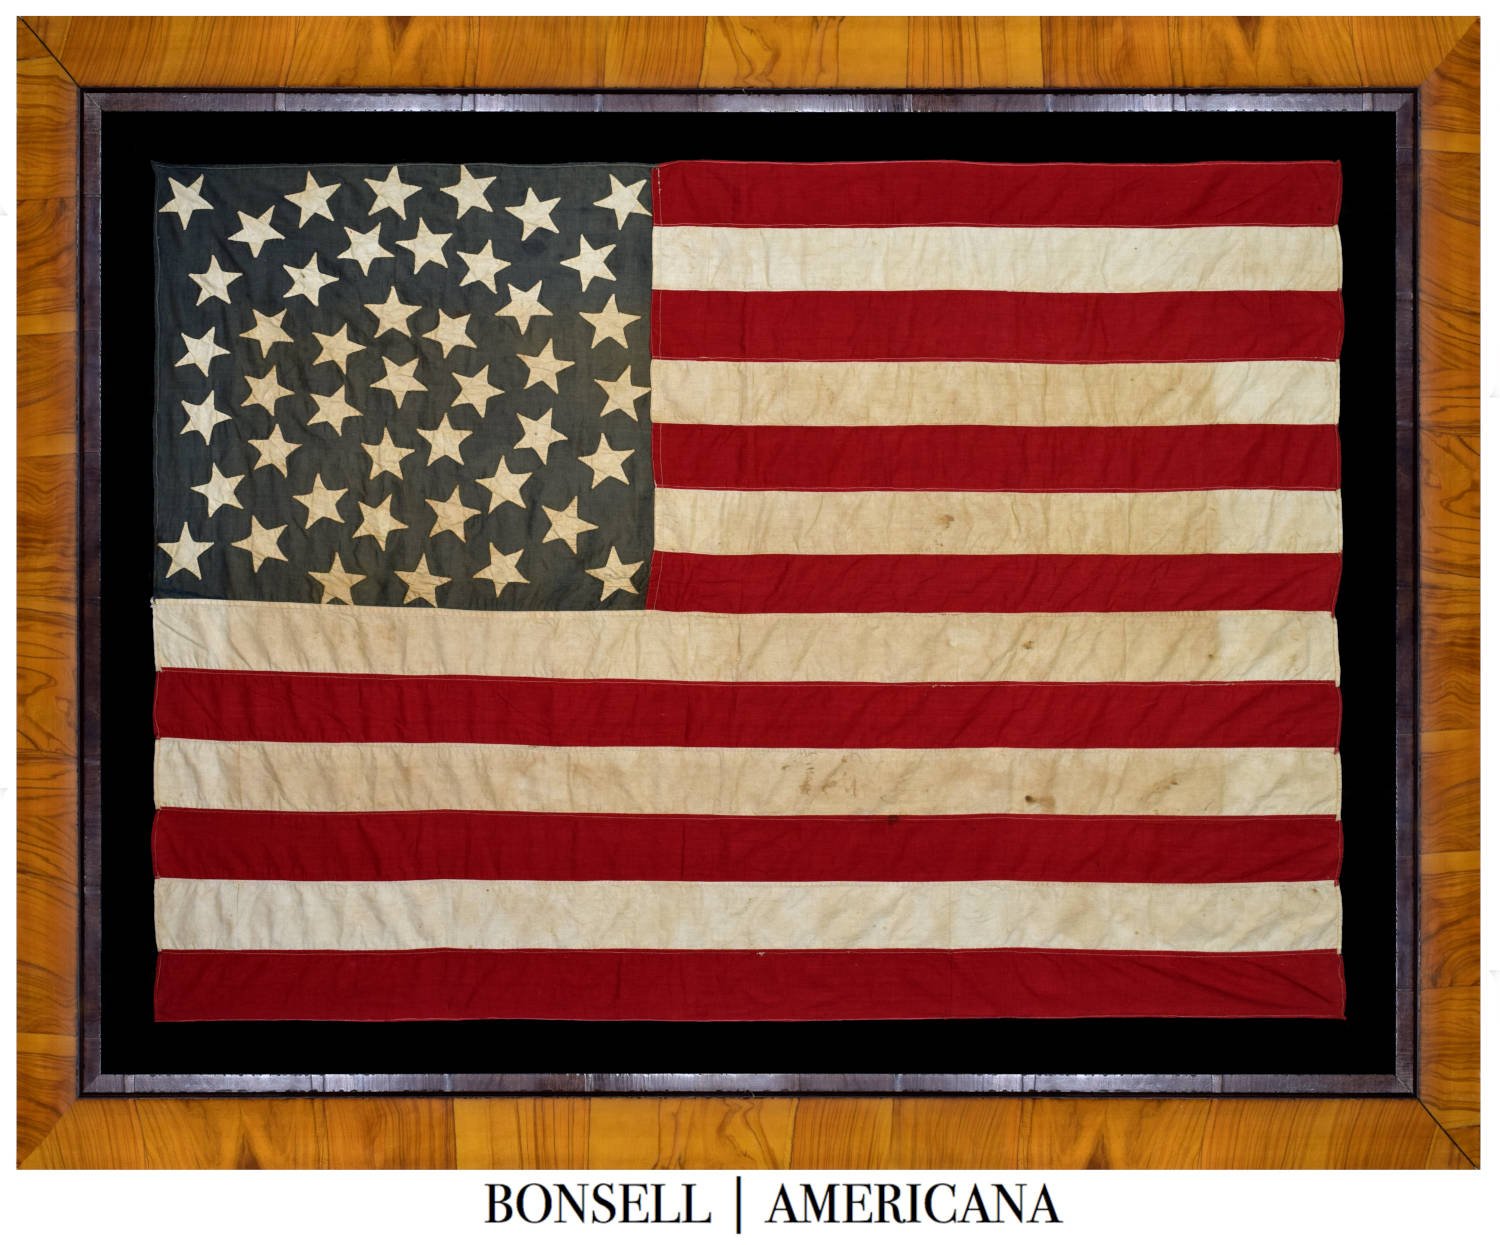 Homemade 44 Star Antique American Flag with an Outstanding